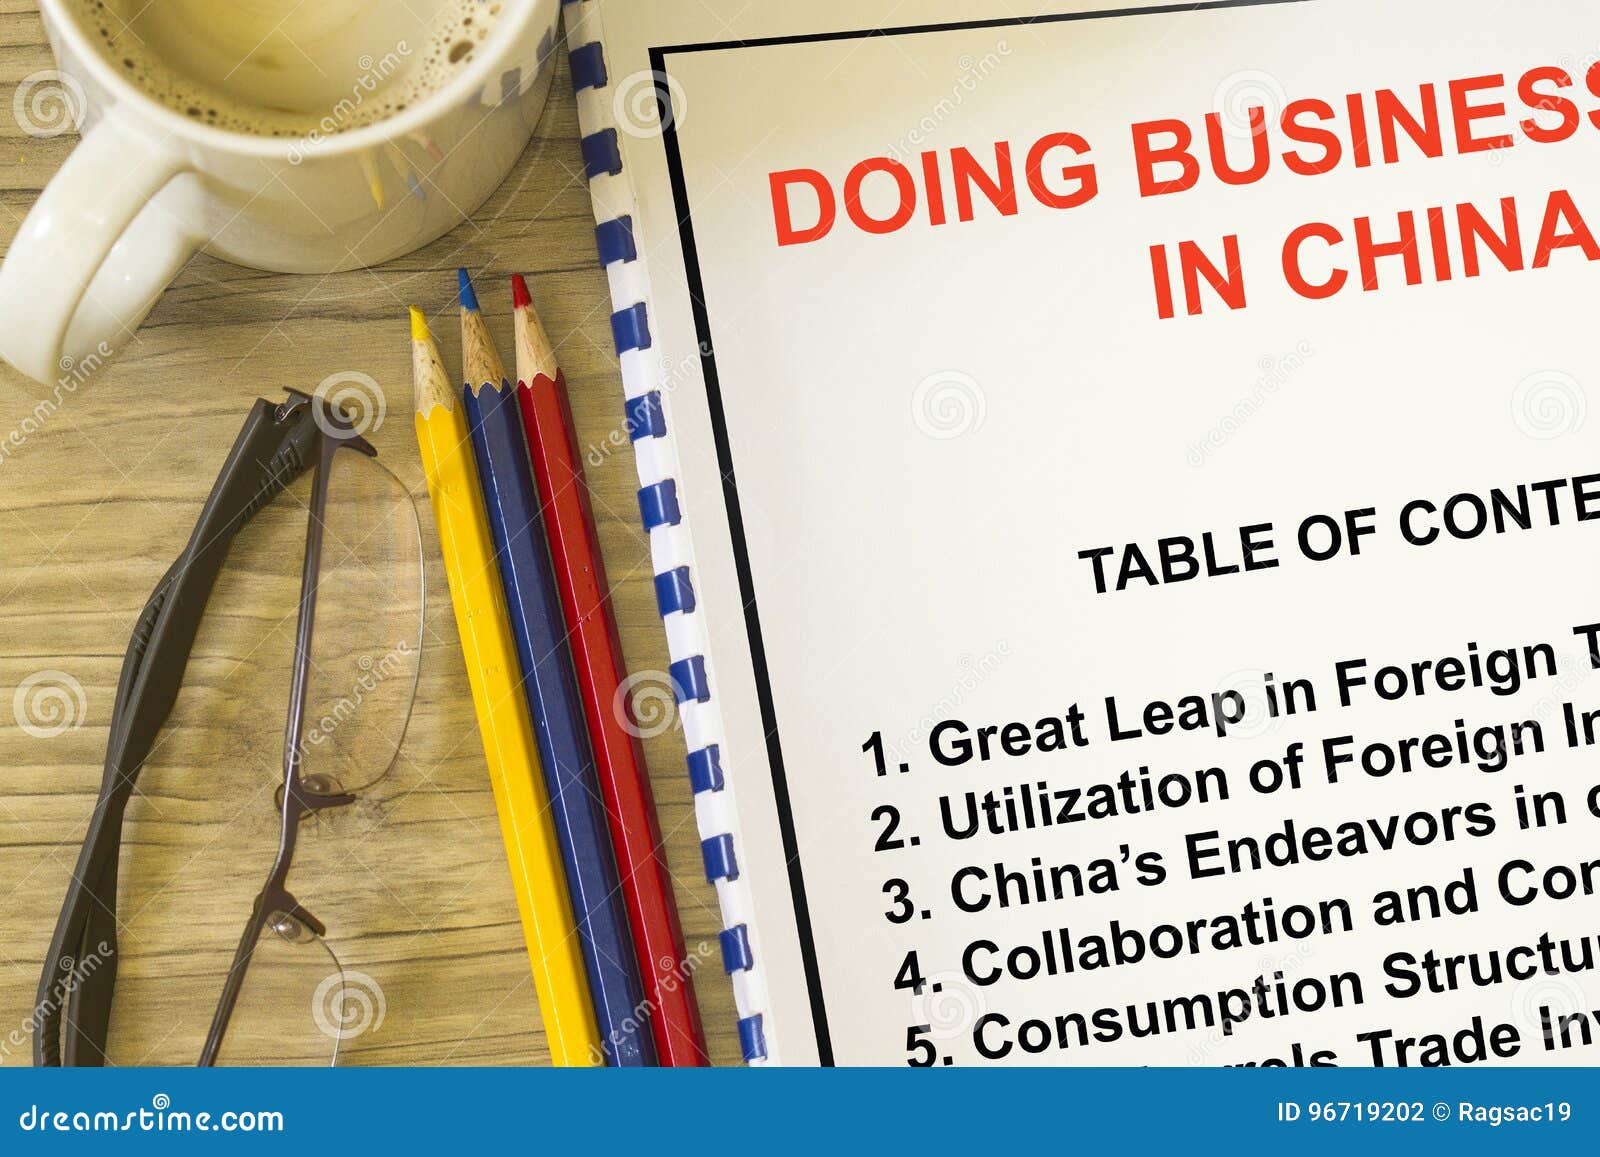 Doing Business In China Concept Stock Photo Image of paper, project